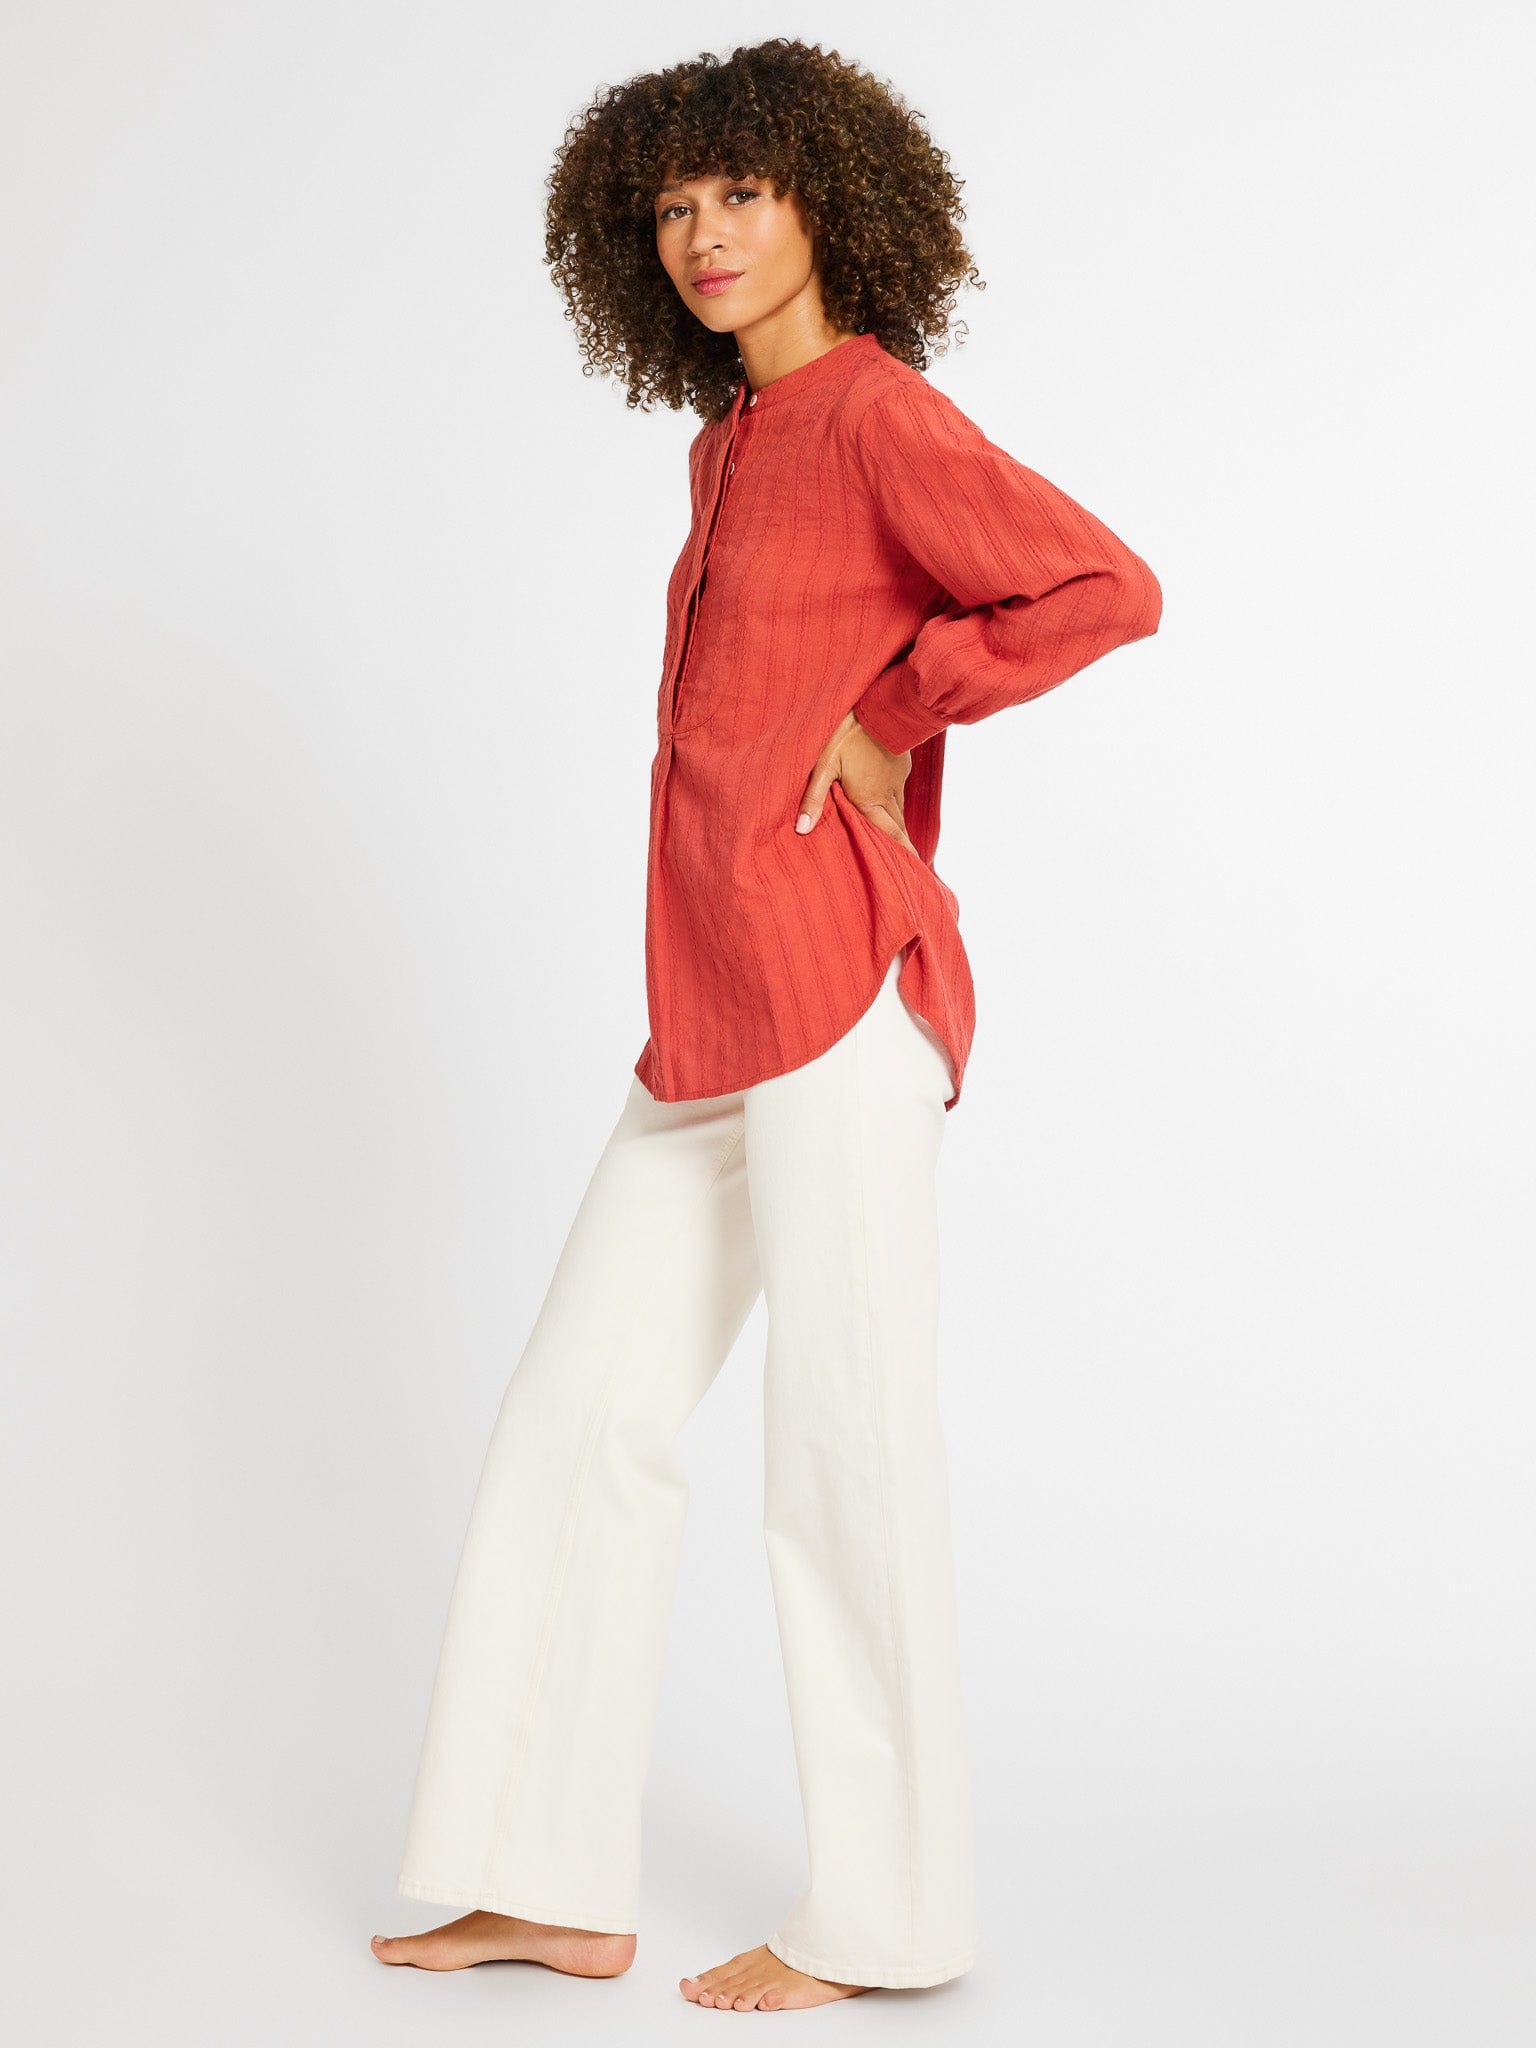 MILLE Clothing Tilda Top in Spice